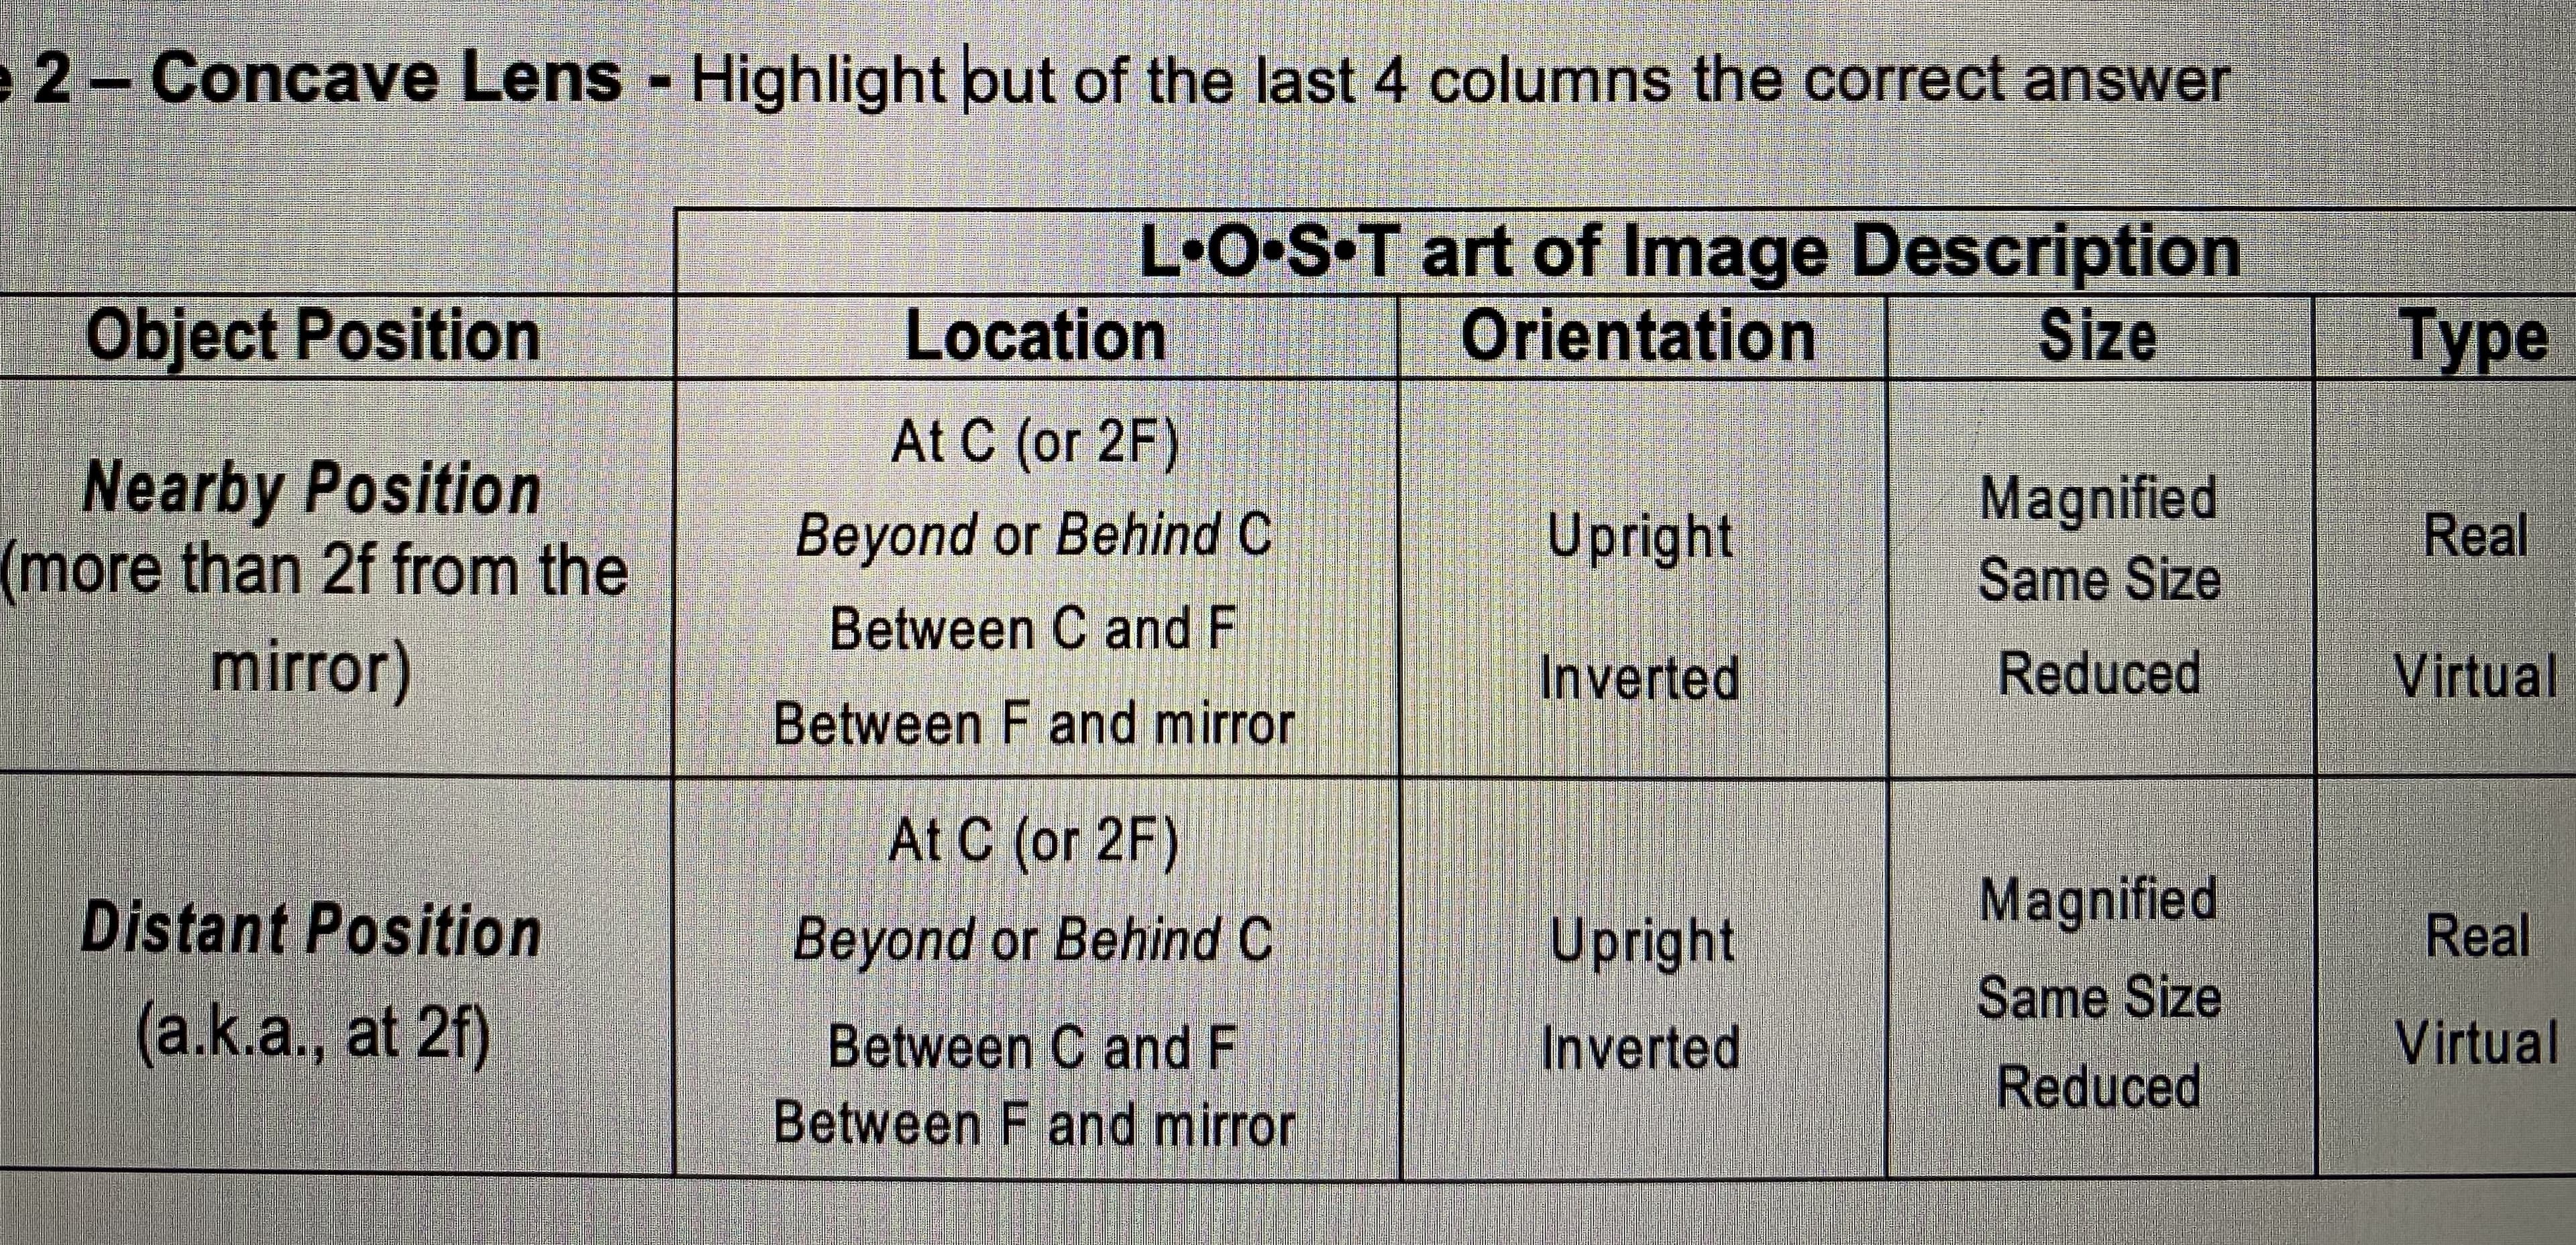 e 2 Concave Lens - Highlight out of the last 4 columns the correct answer
L•O•S•T art of Image Description
Orientation
Object Position
Location
Size
Type
At C (or 2F)
Nearby Position
(more than 2f from the
mirror)
Magnified
Beyond or Behind C
Upright
Real
Same Size
Between C and
Inverted
Reduced
Virtual
Between F and mirror
At C (or 2F)
Distant Position
Upright
Magnified
Beyond or Behind C
Real
Same Size
(a.k.a., at 2f)
Between C and F
Inverted
Virtual
Reduced
Between F and mirror
